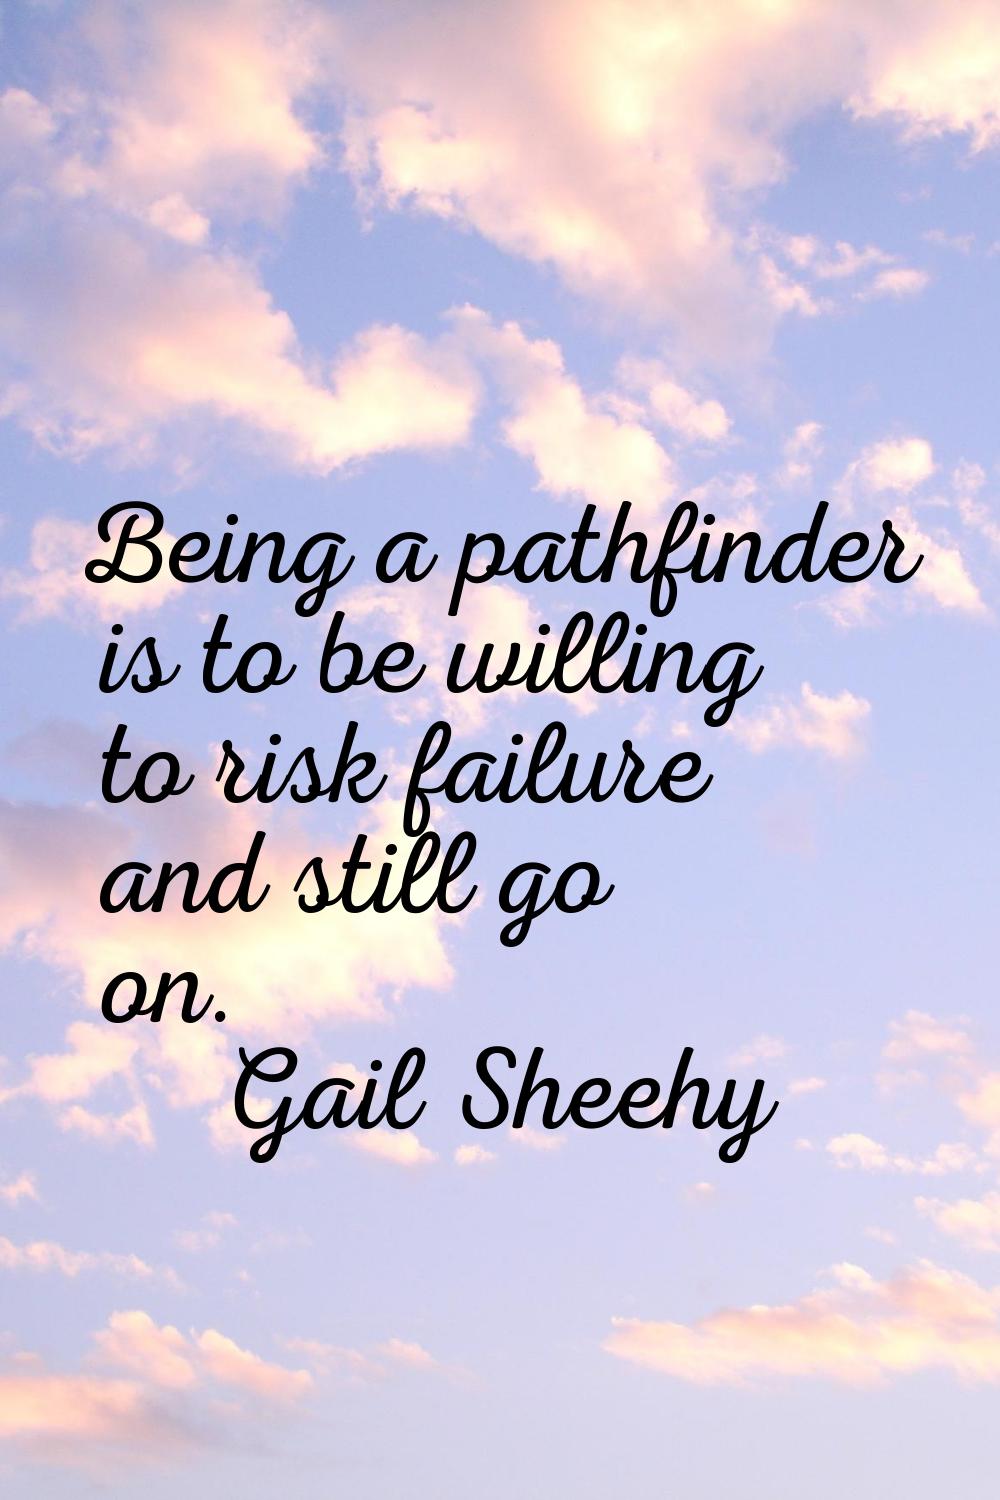 Being a pathfinder is to be willing to risk failure and still go on.